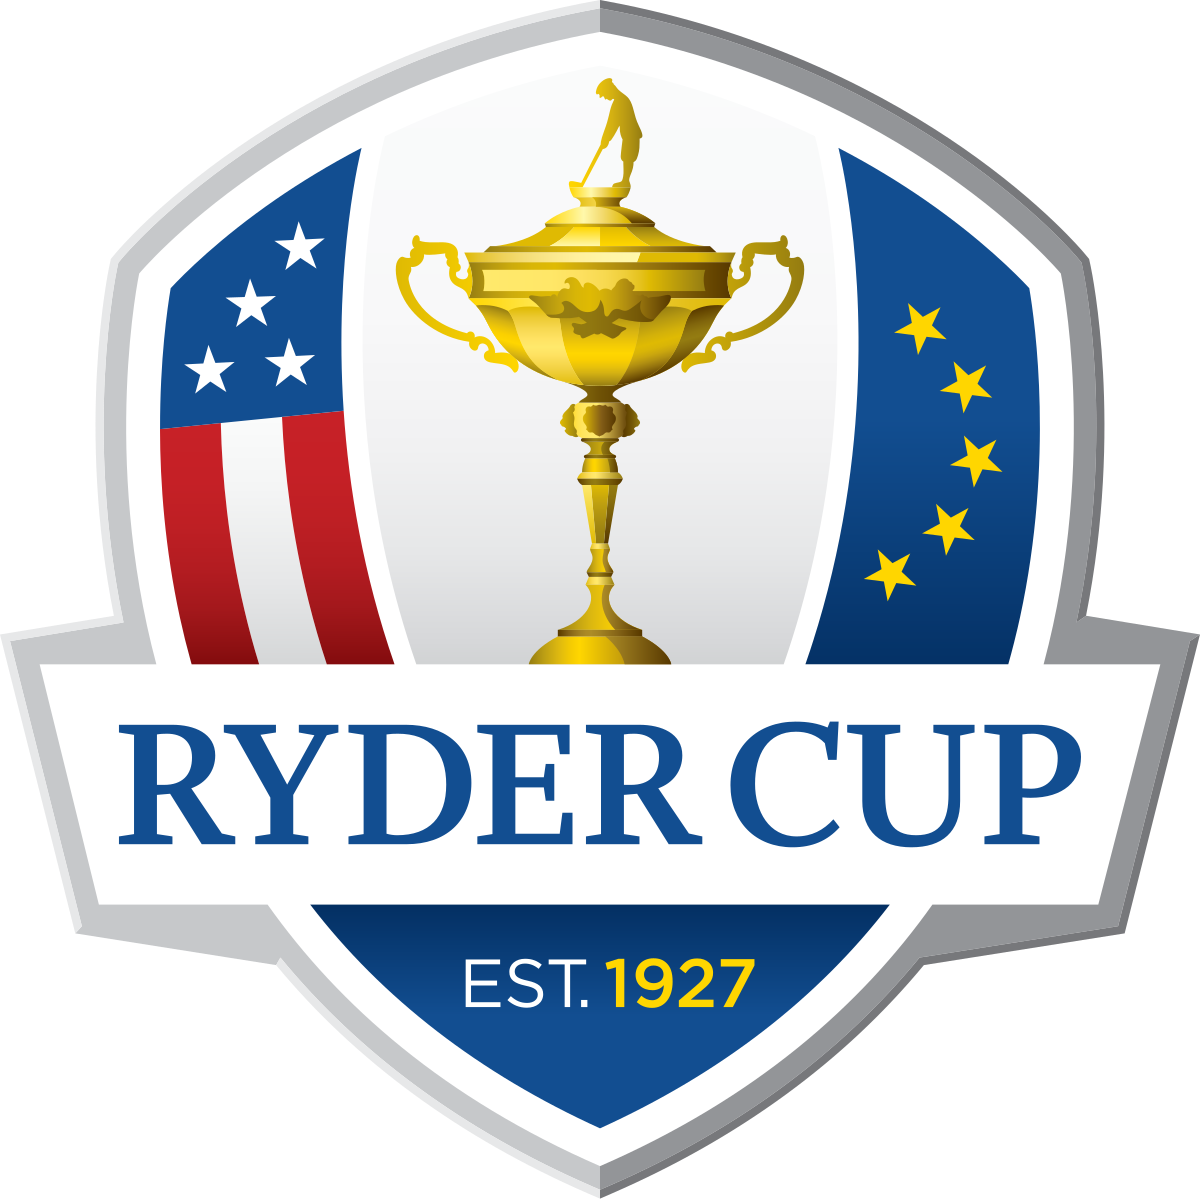 Ryder Cup - Wikipedia